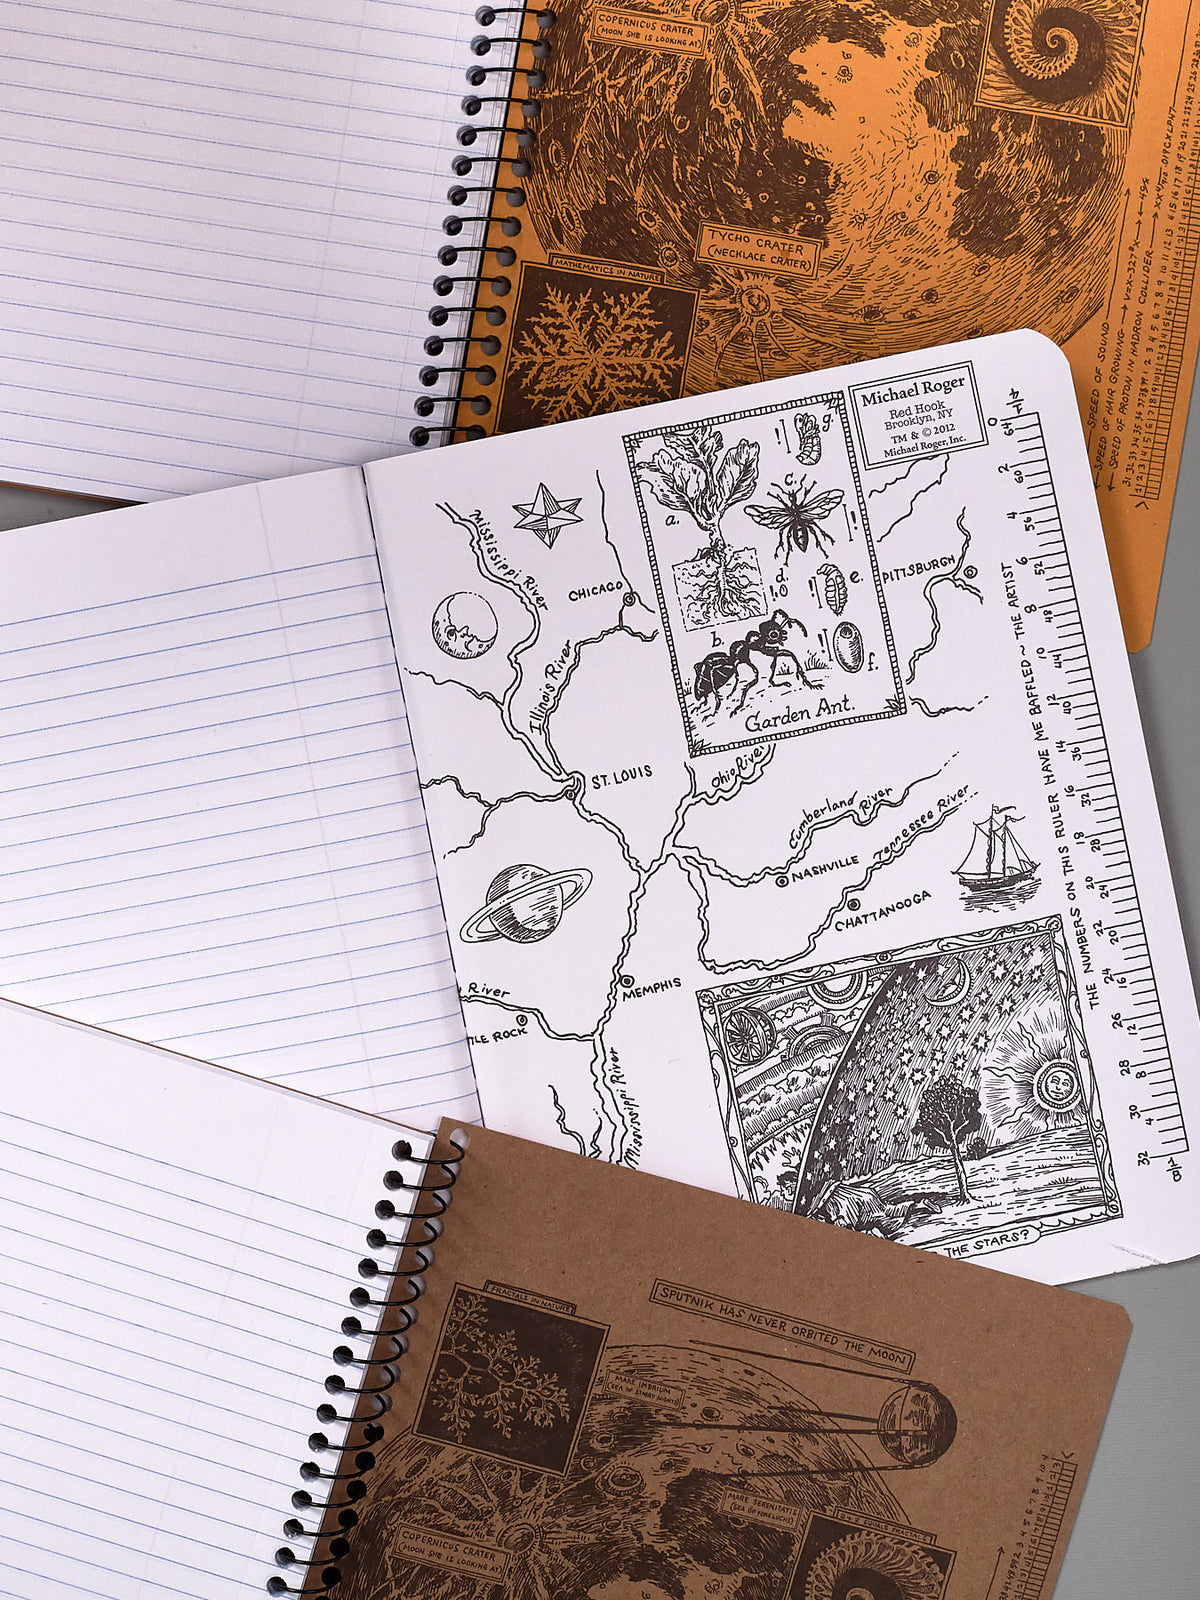 A Decomposition Recycled Notebook – Large/Ruled (Sunflowers) with a map and drawings on it.